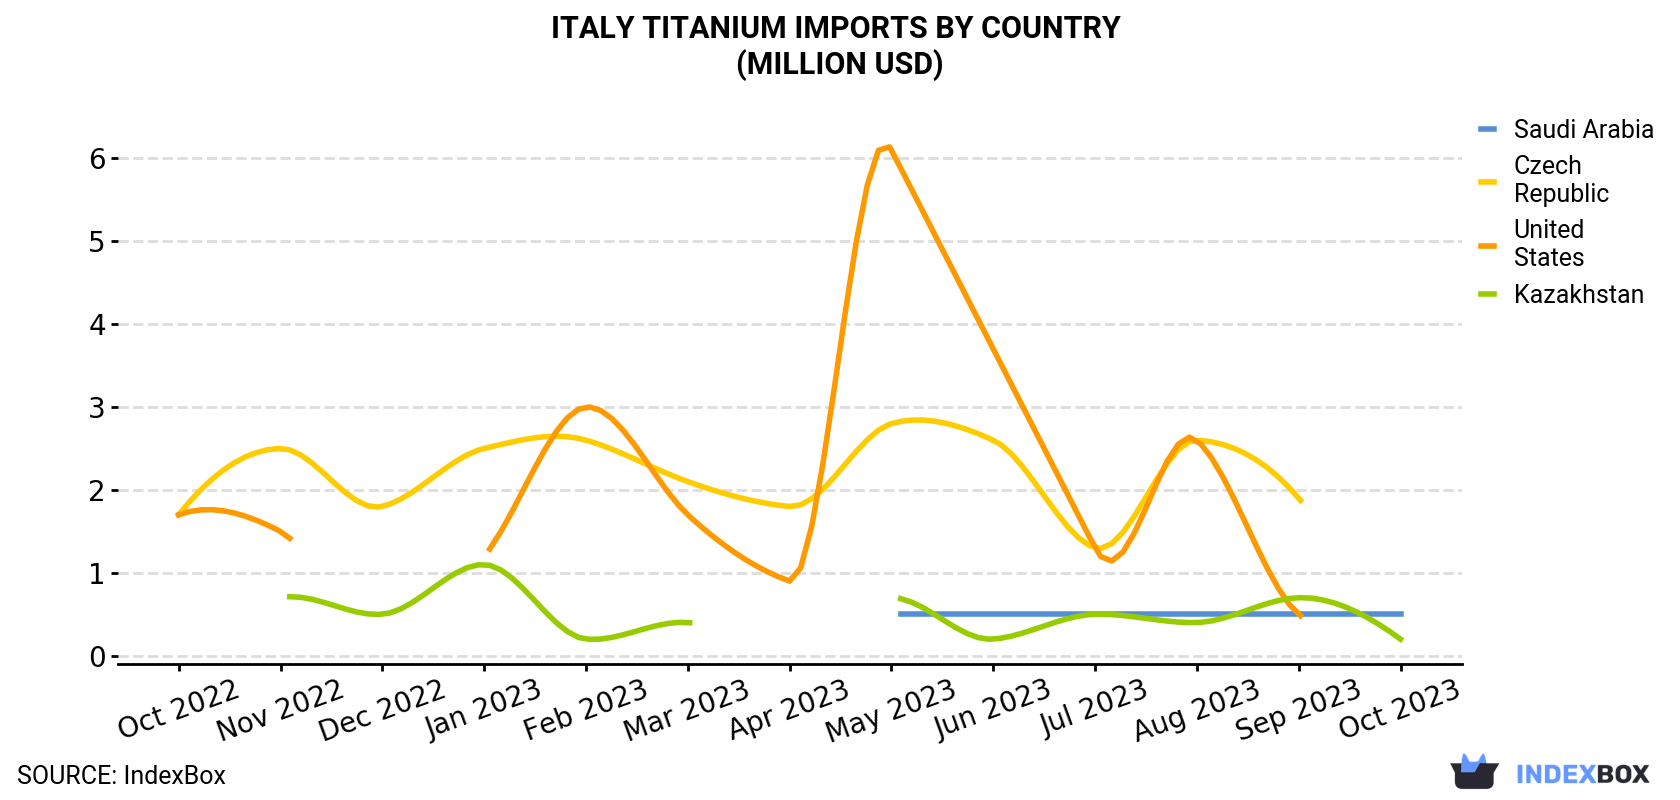 Italy Titanium Imports By Country (Million USD)